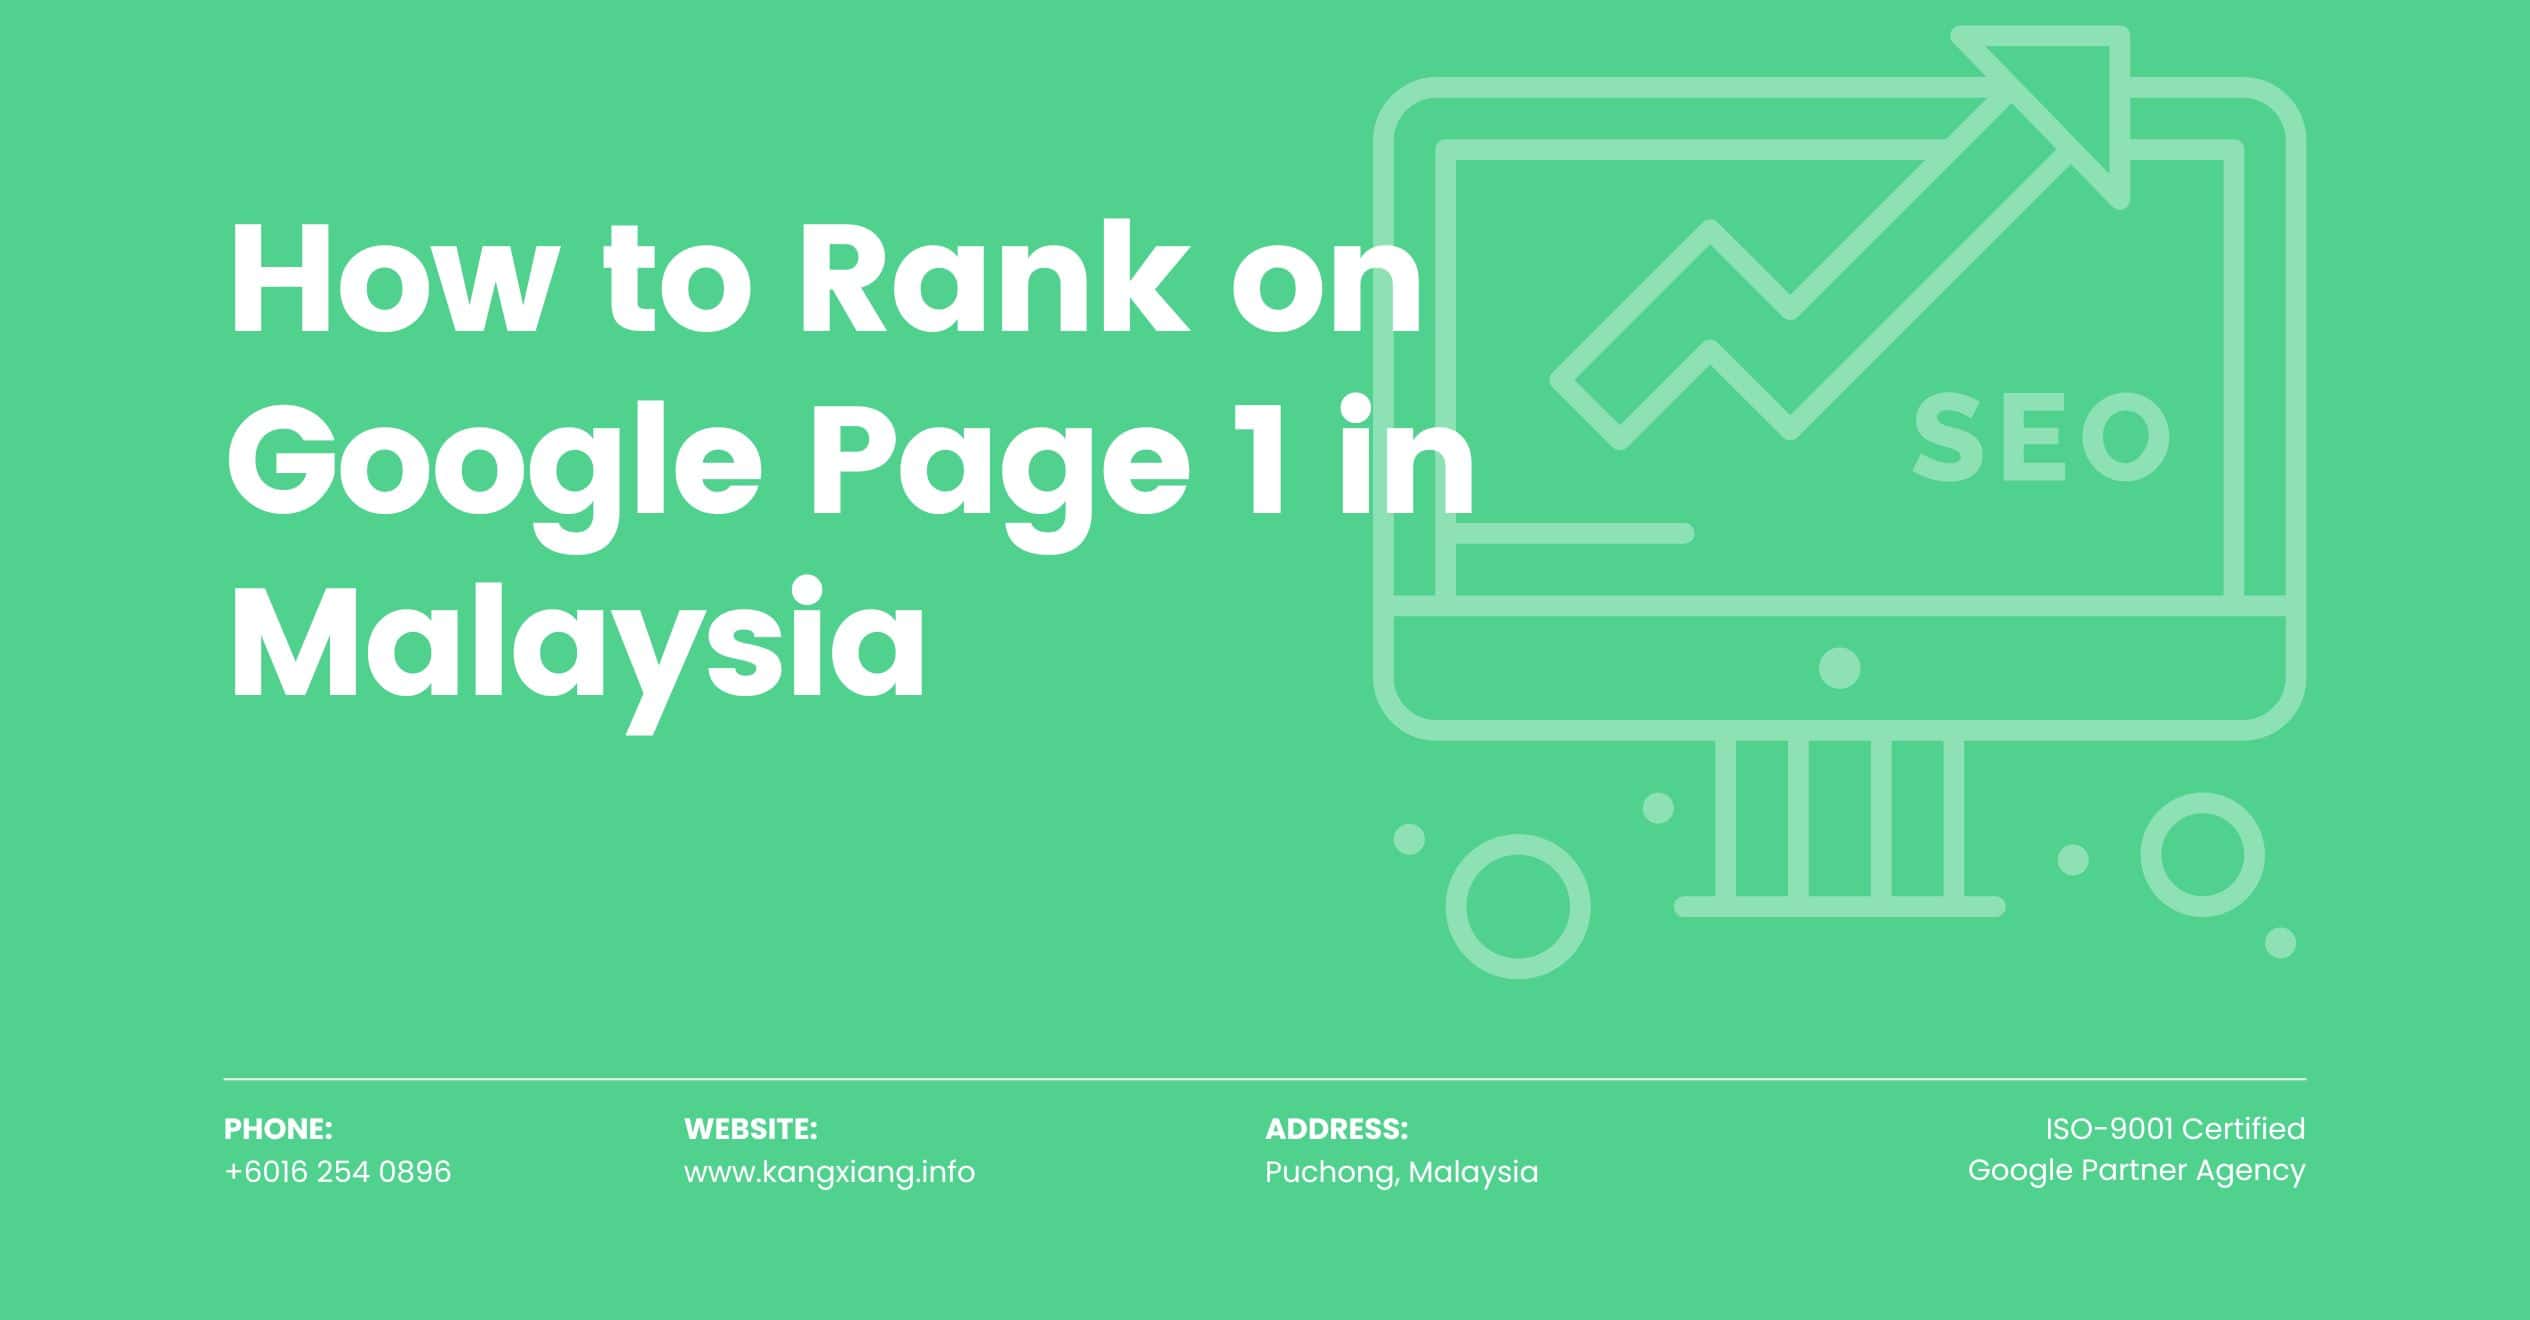 How to Rank on Google Page 1 in Malaysia